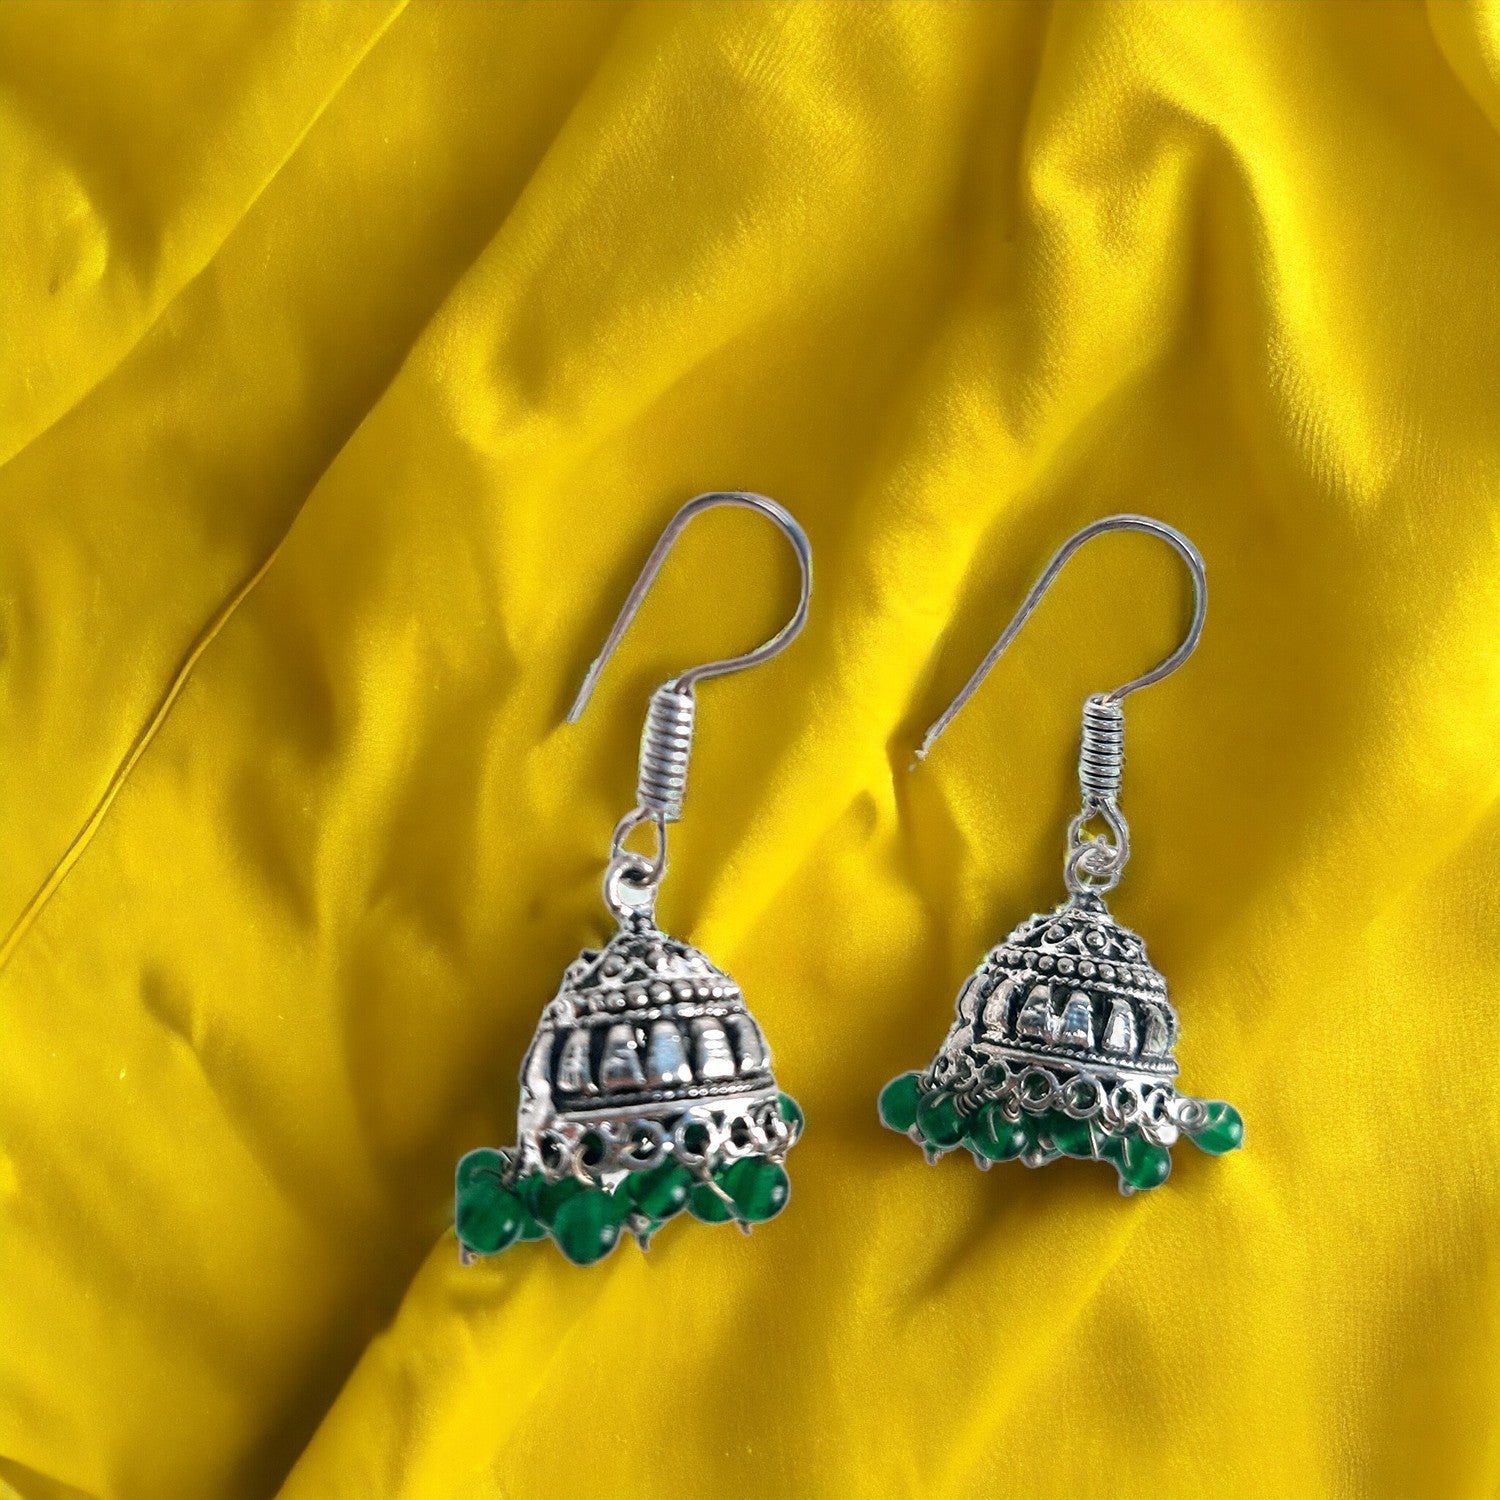 Earrings Jhumka - for Girls and Women | Oxidised Jewelry | Latest Stylish Fashion Jewellery | Gifts for Her, Friendship Day, Valentine's Day Gift - Apkamart